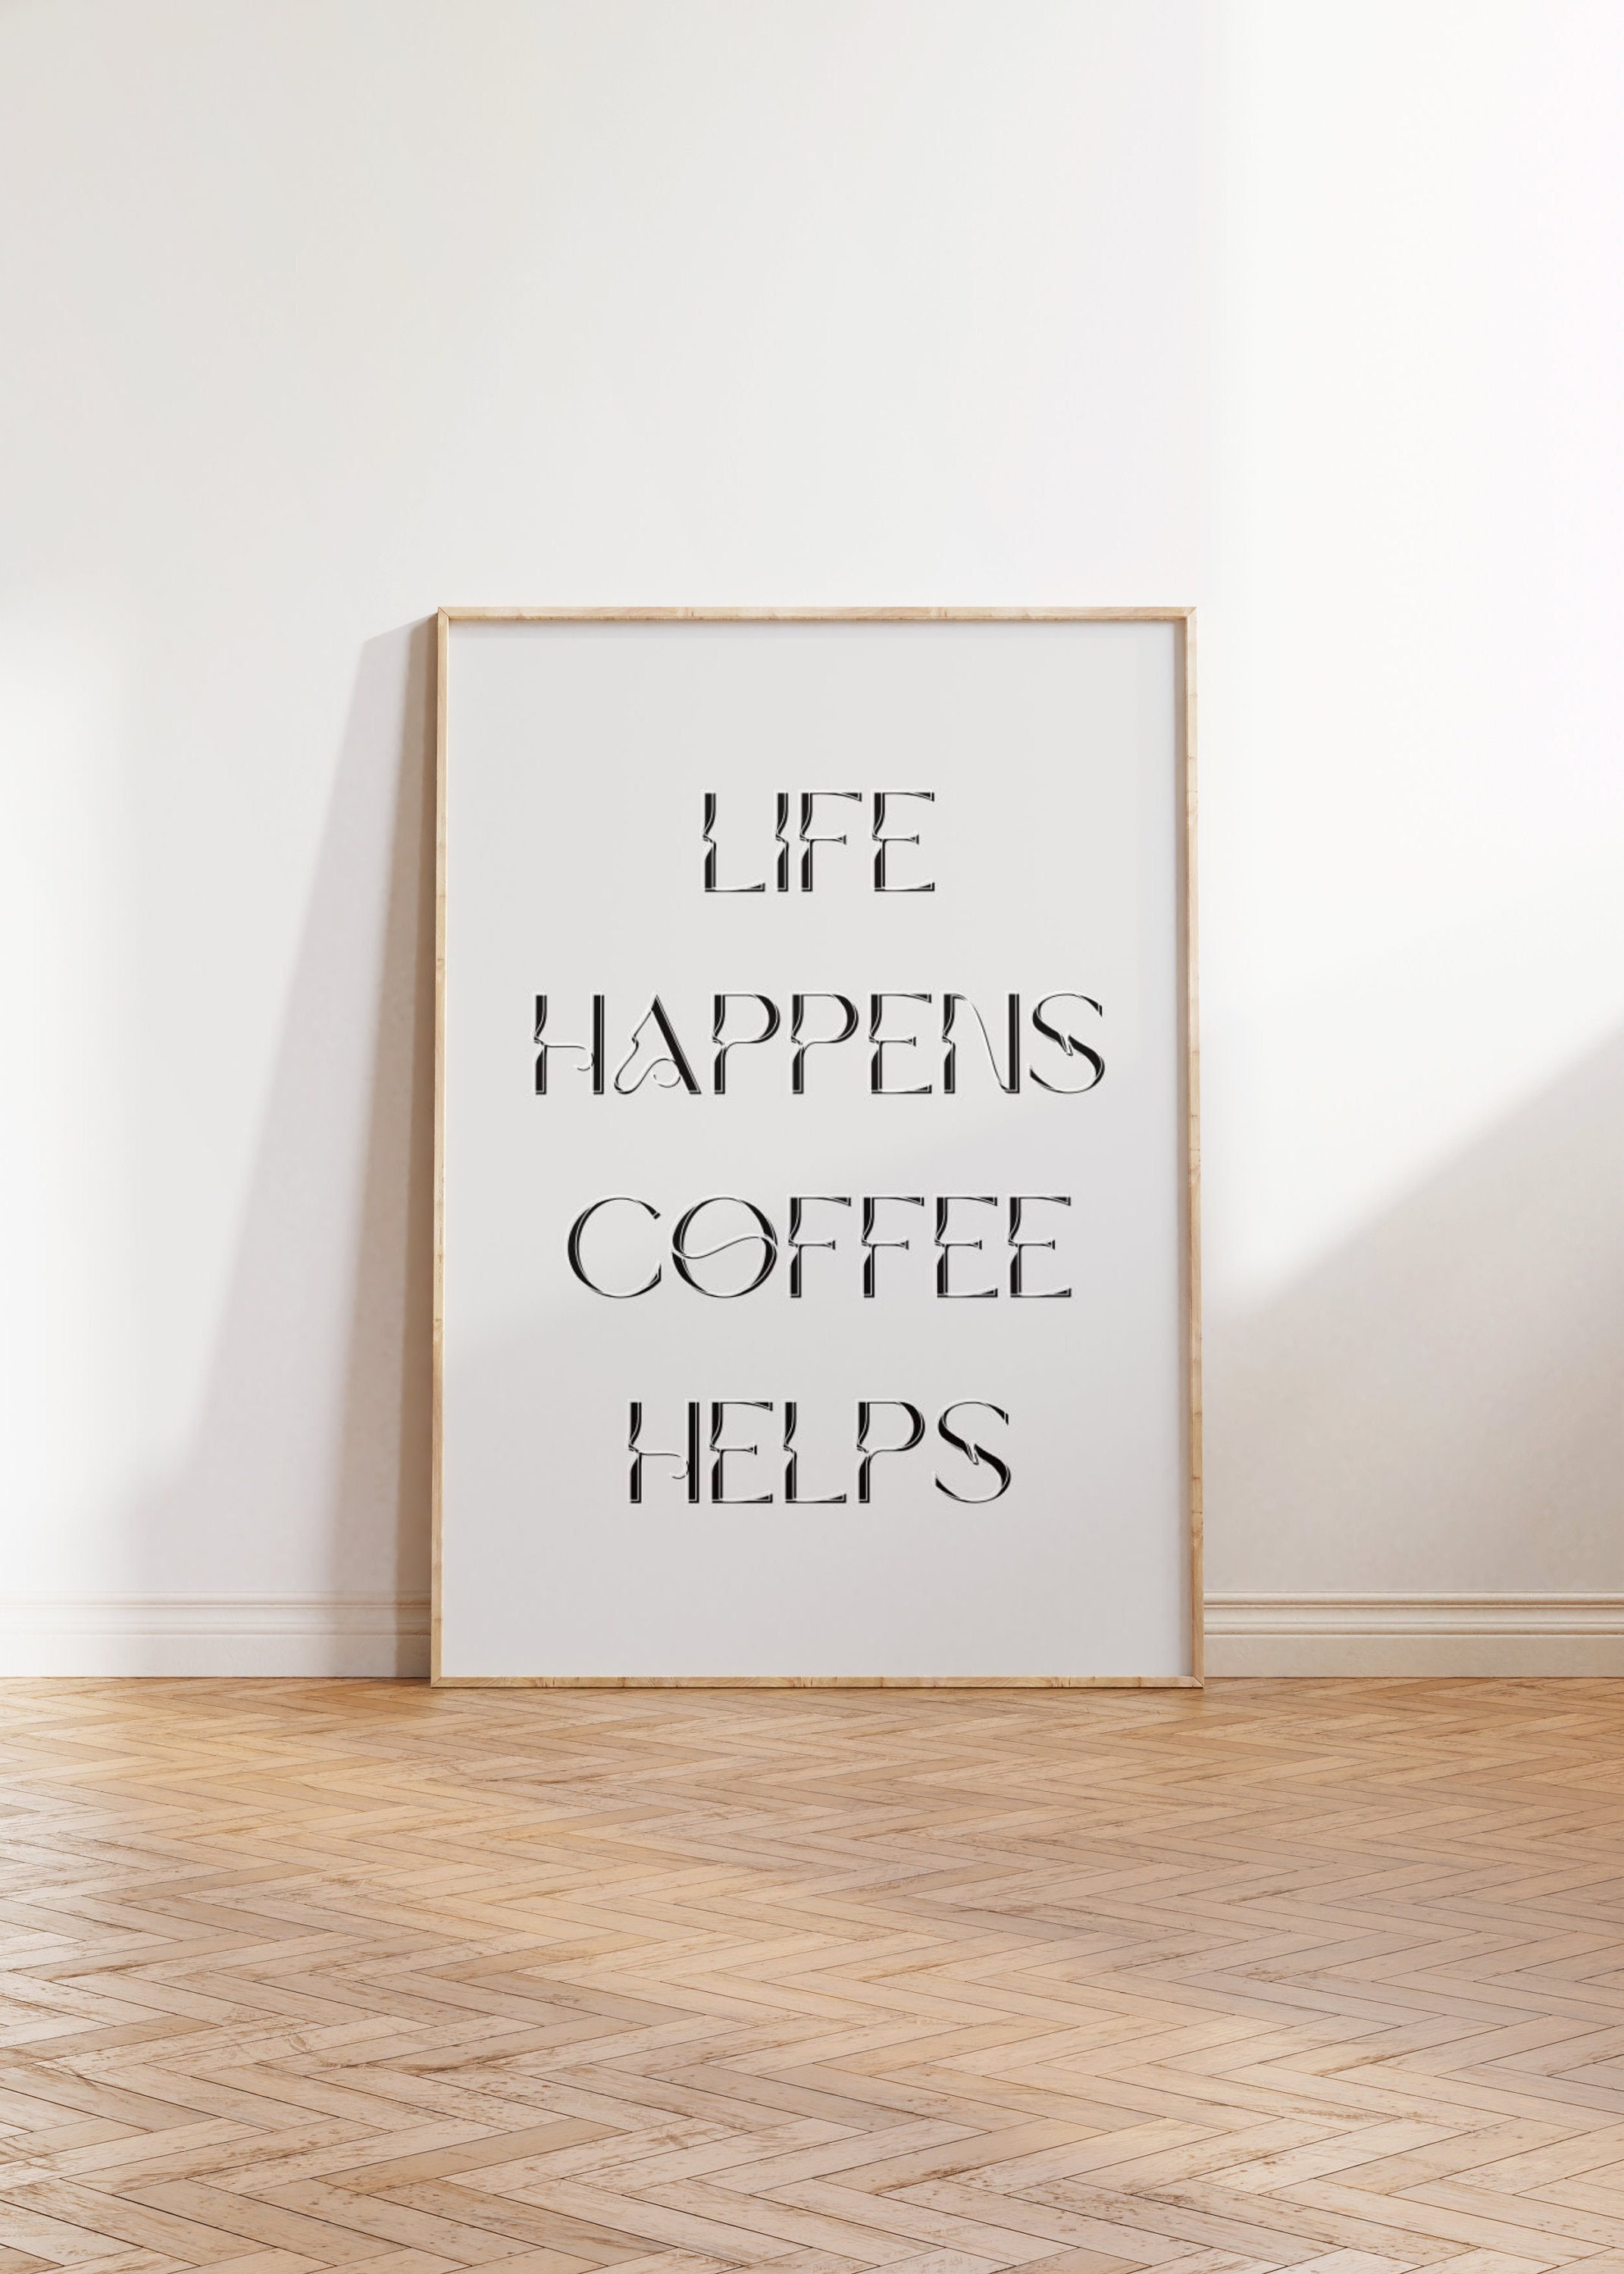 Cozy Quote Trendy Etsy Happens Fancy Wall Helps - Download, Cool Digital Art, Minimalist Print, Poster, Calm Coffee Quote Life Room Chic Deco